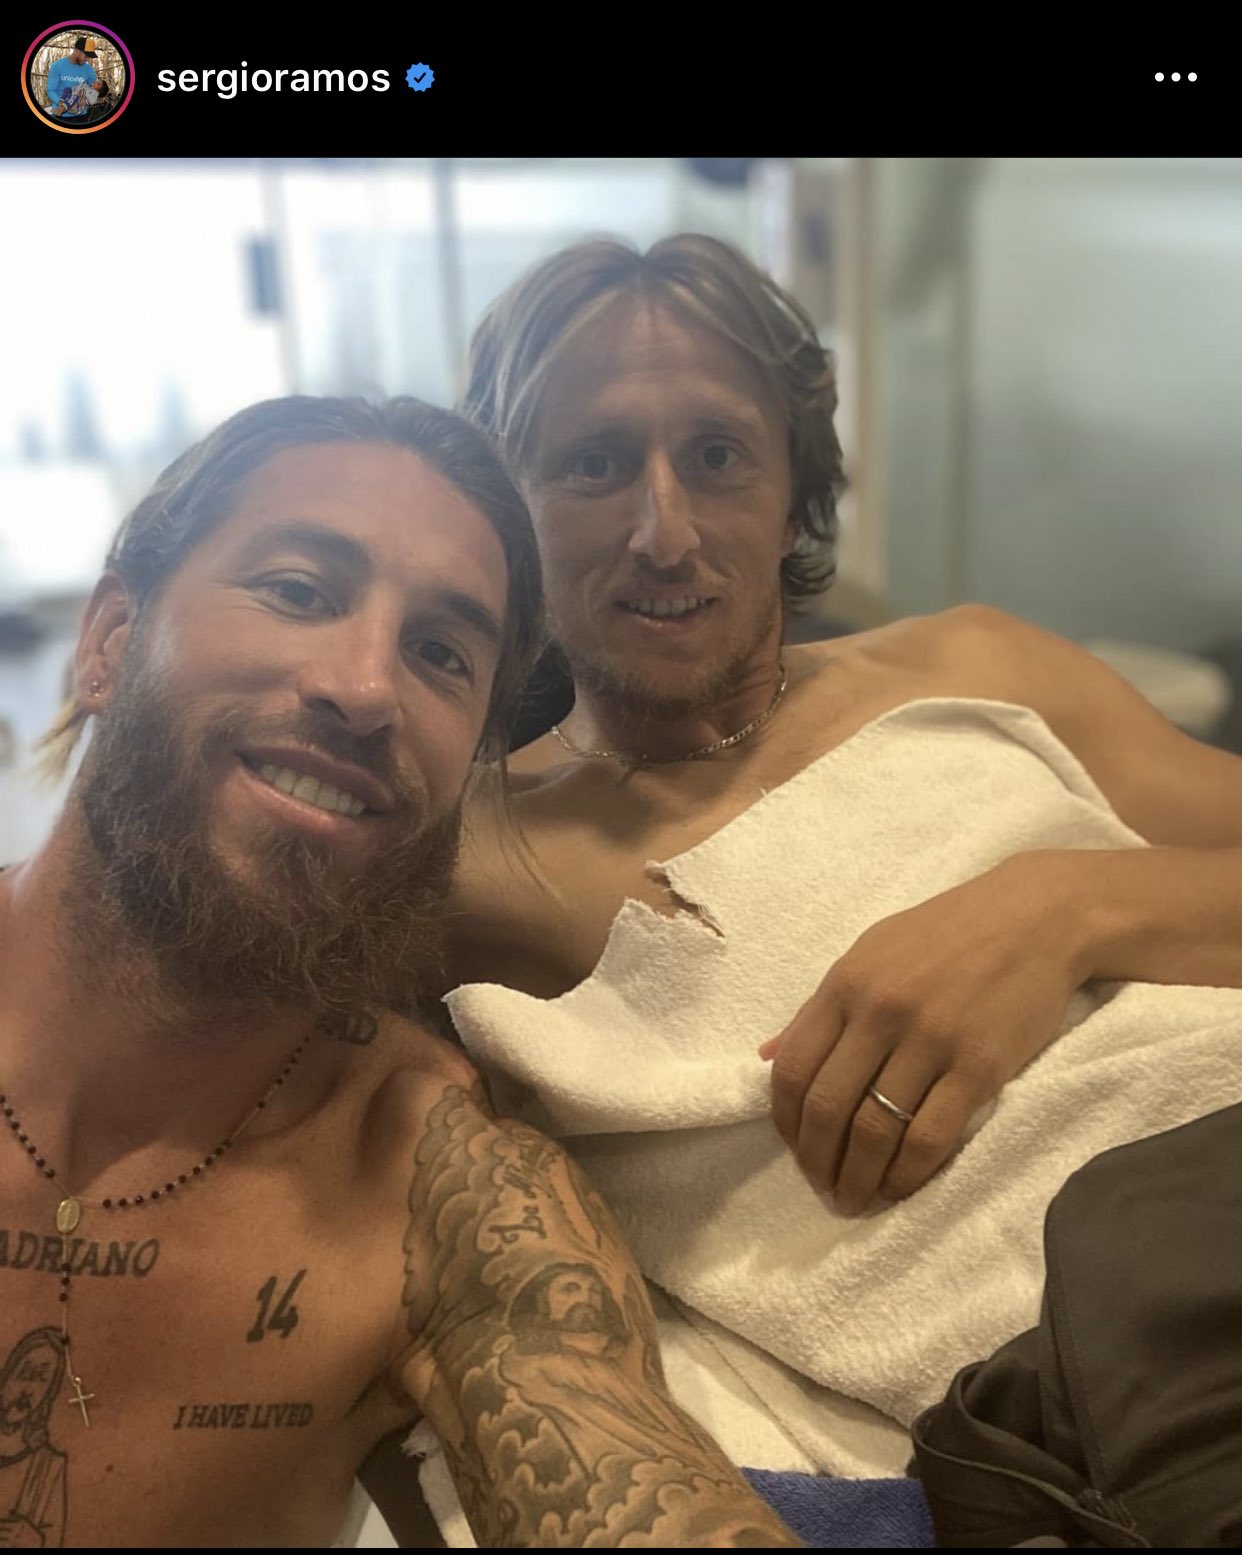 bala Y equipo compromiso Footy Humour on Twitter: "Why does Luka Modric look like he has just given  birth to Sergio Ramos' baby? https://t.co/nNcM61wfu5" / Twitter